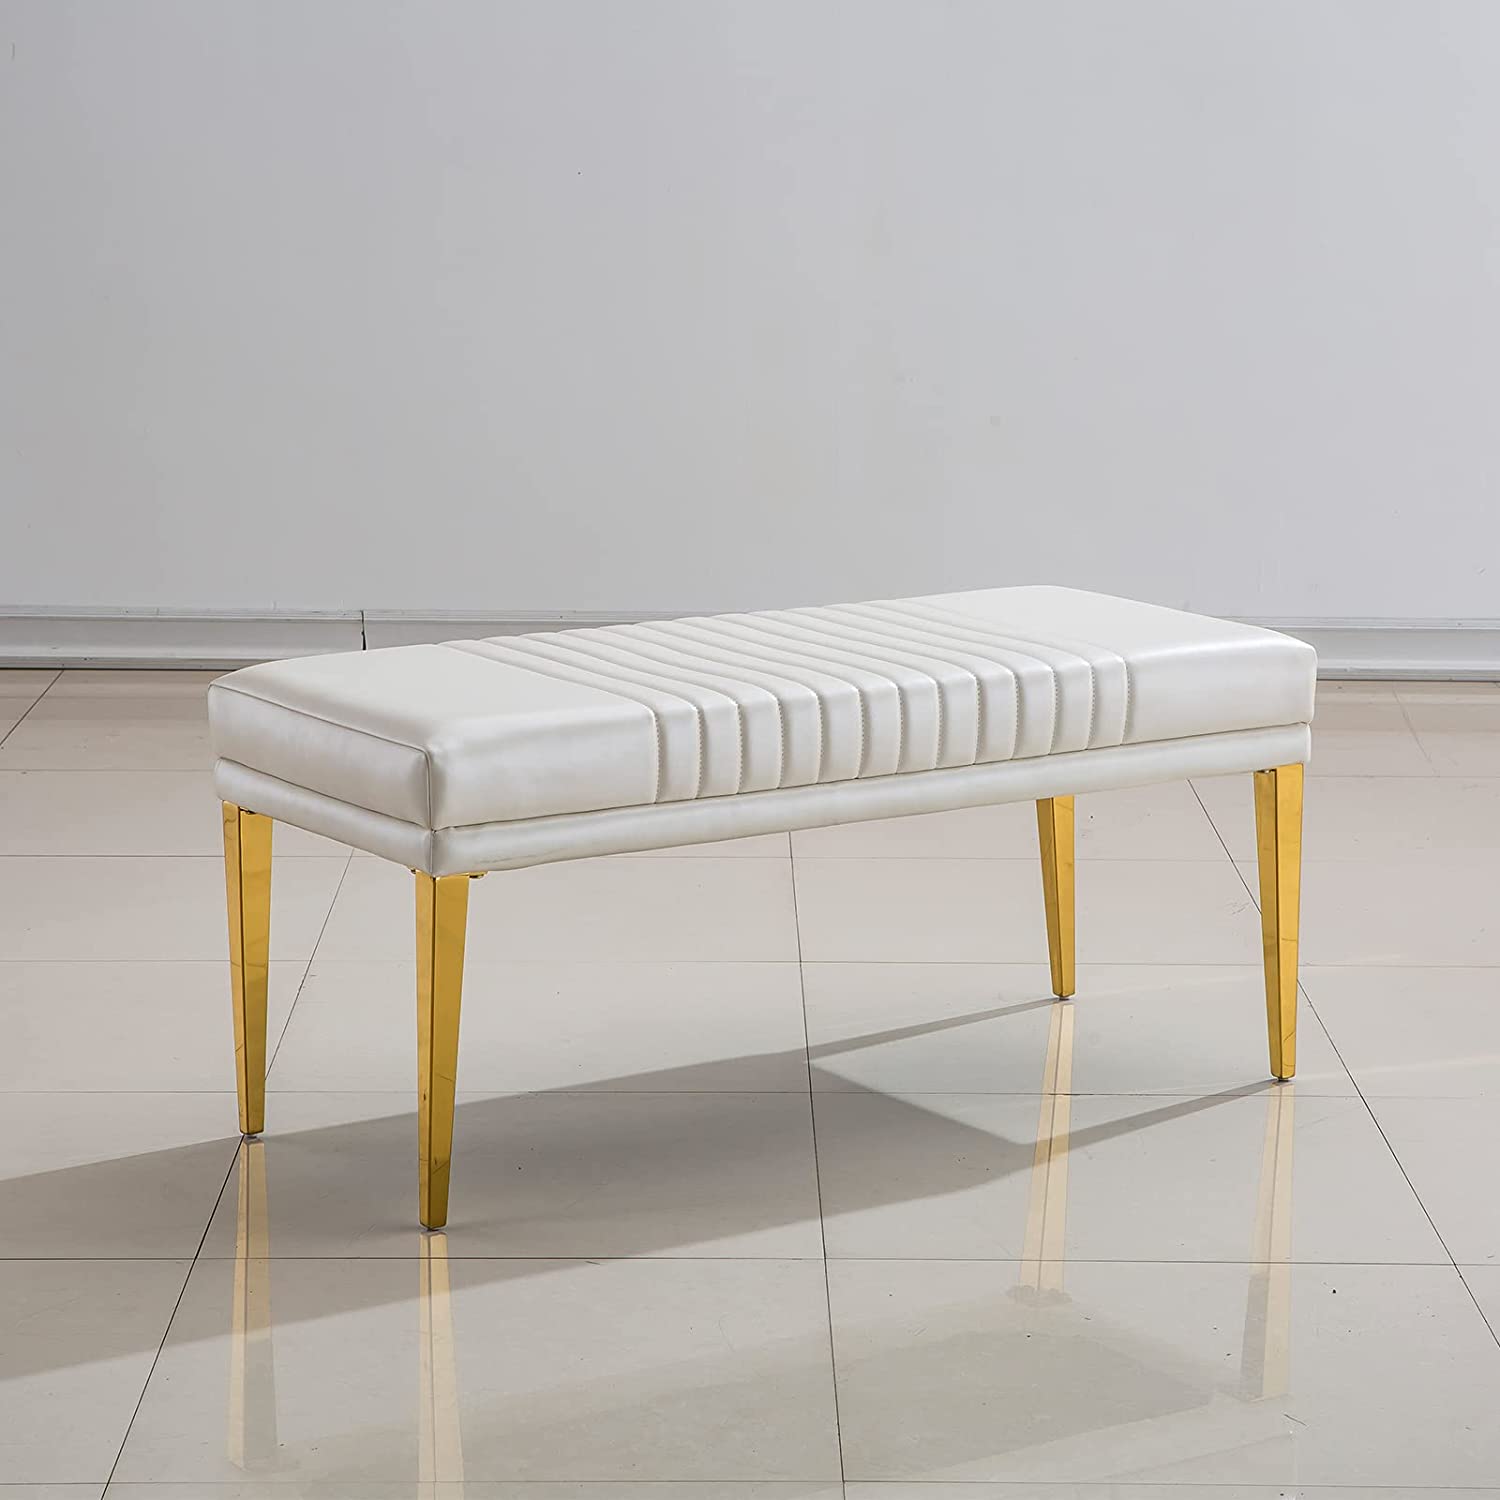 Elevate Your Dining Experience with the AUZ Modern Luxury Upholstered Bench